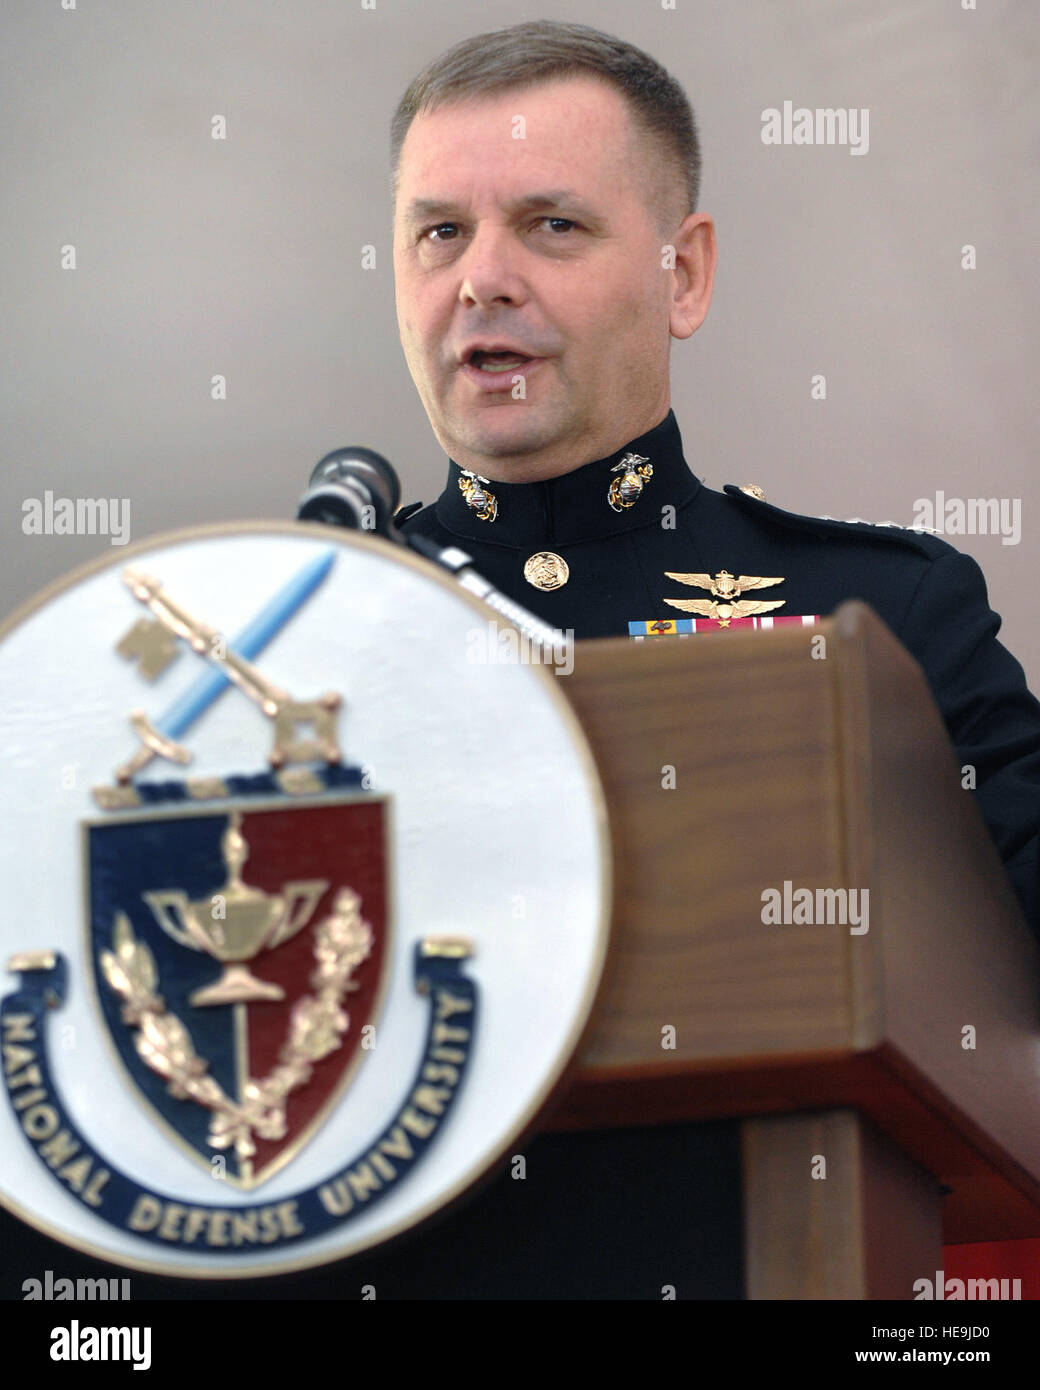 Marine Corps Gen. James E. Cartwright, vice chairman of the Joint Chiefs of Staff, at the National Defense University graduation at Fort Lesley J. McNair in Washington, D.C., June 12, 2008 .  Air Force Master Sgt. Adam M. Stump. (Released) Stock Photo